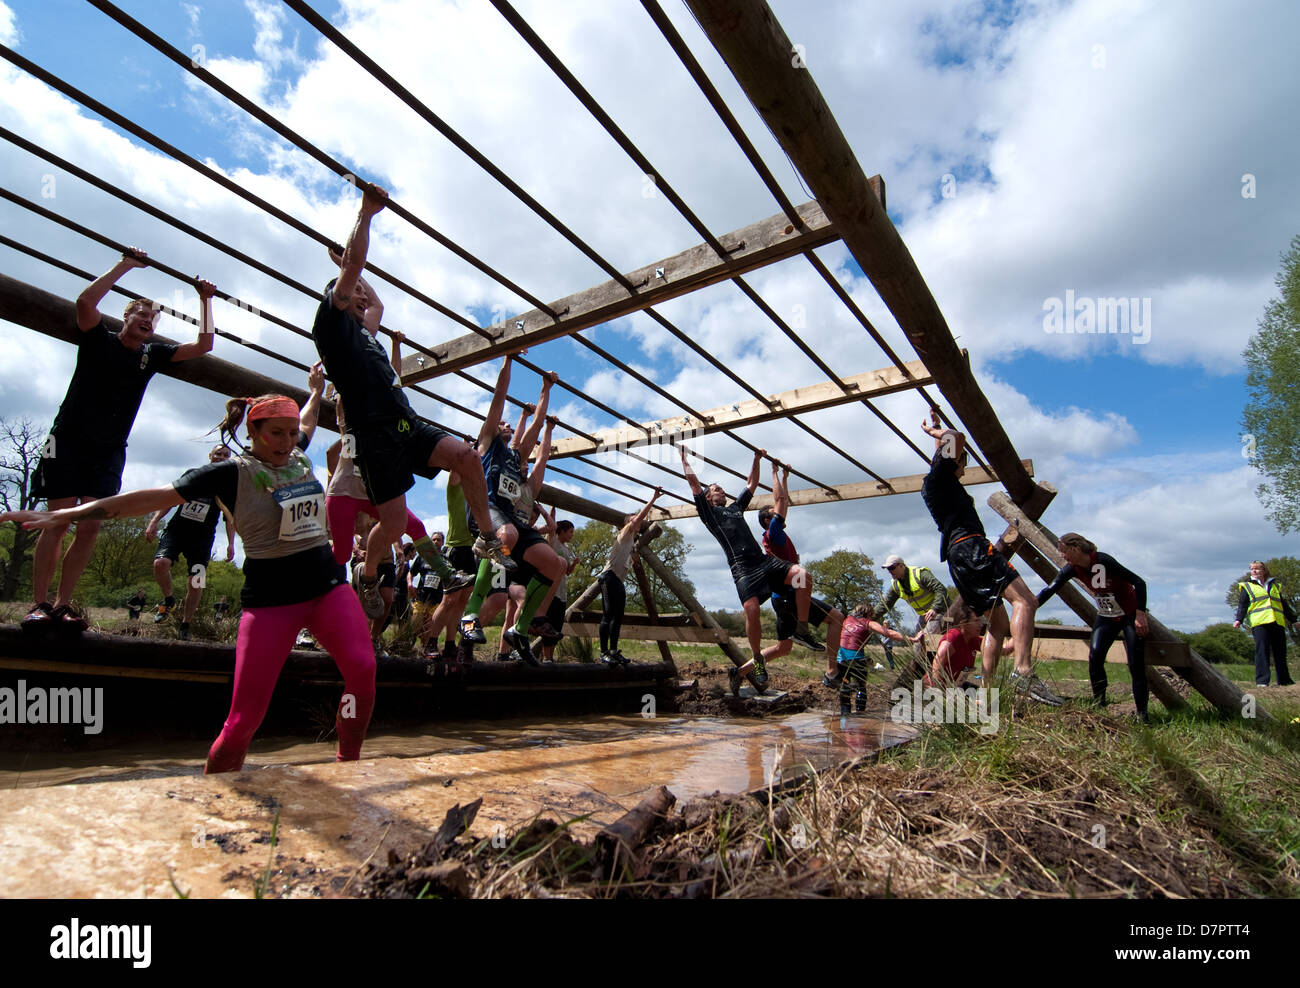 Unable to hold on a female runner drops into the muddy water as the Monkey Bars proved to be one of the most difficult obstacle Stock Photo